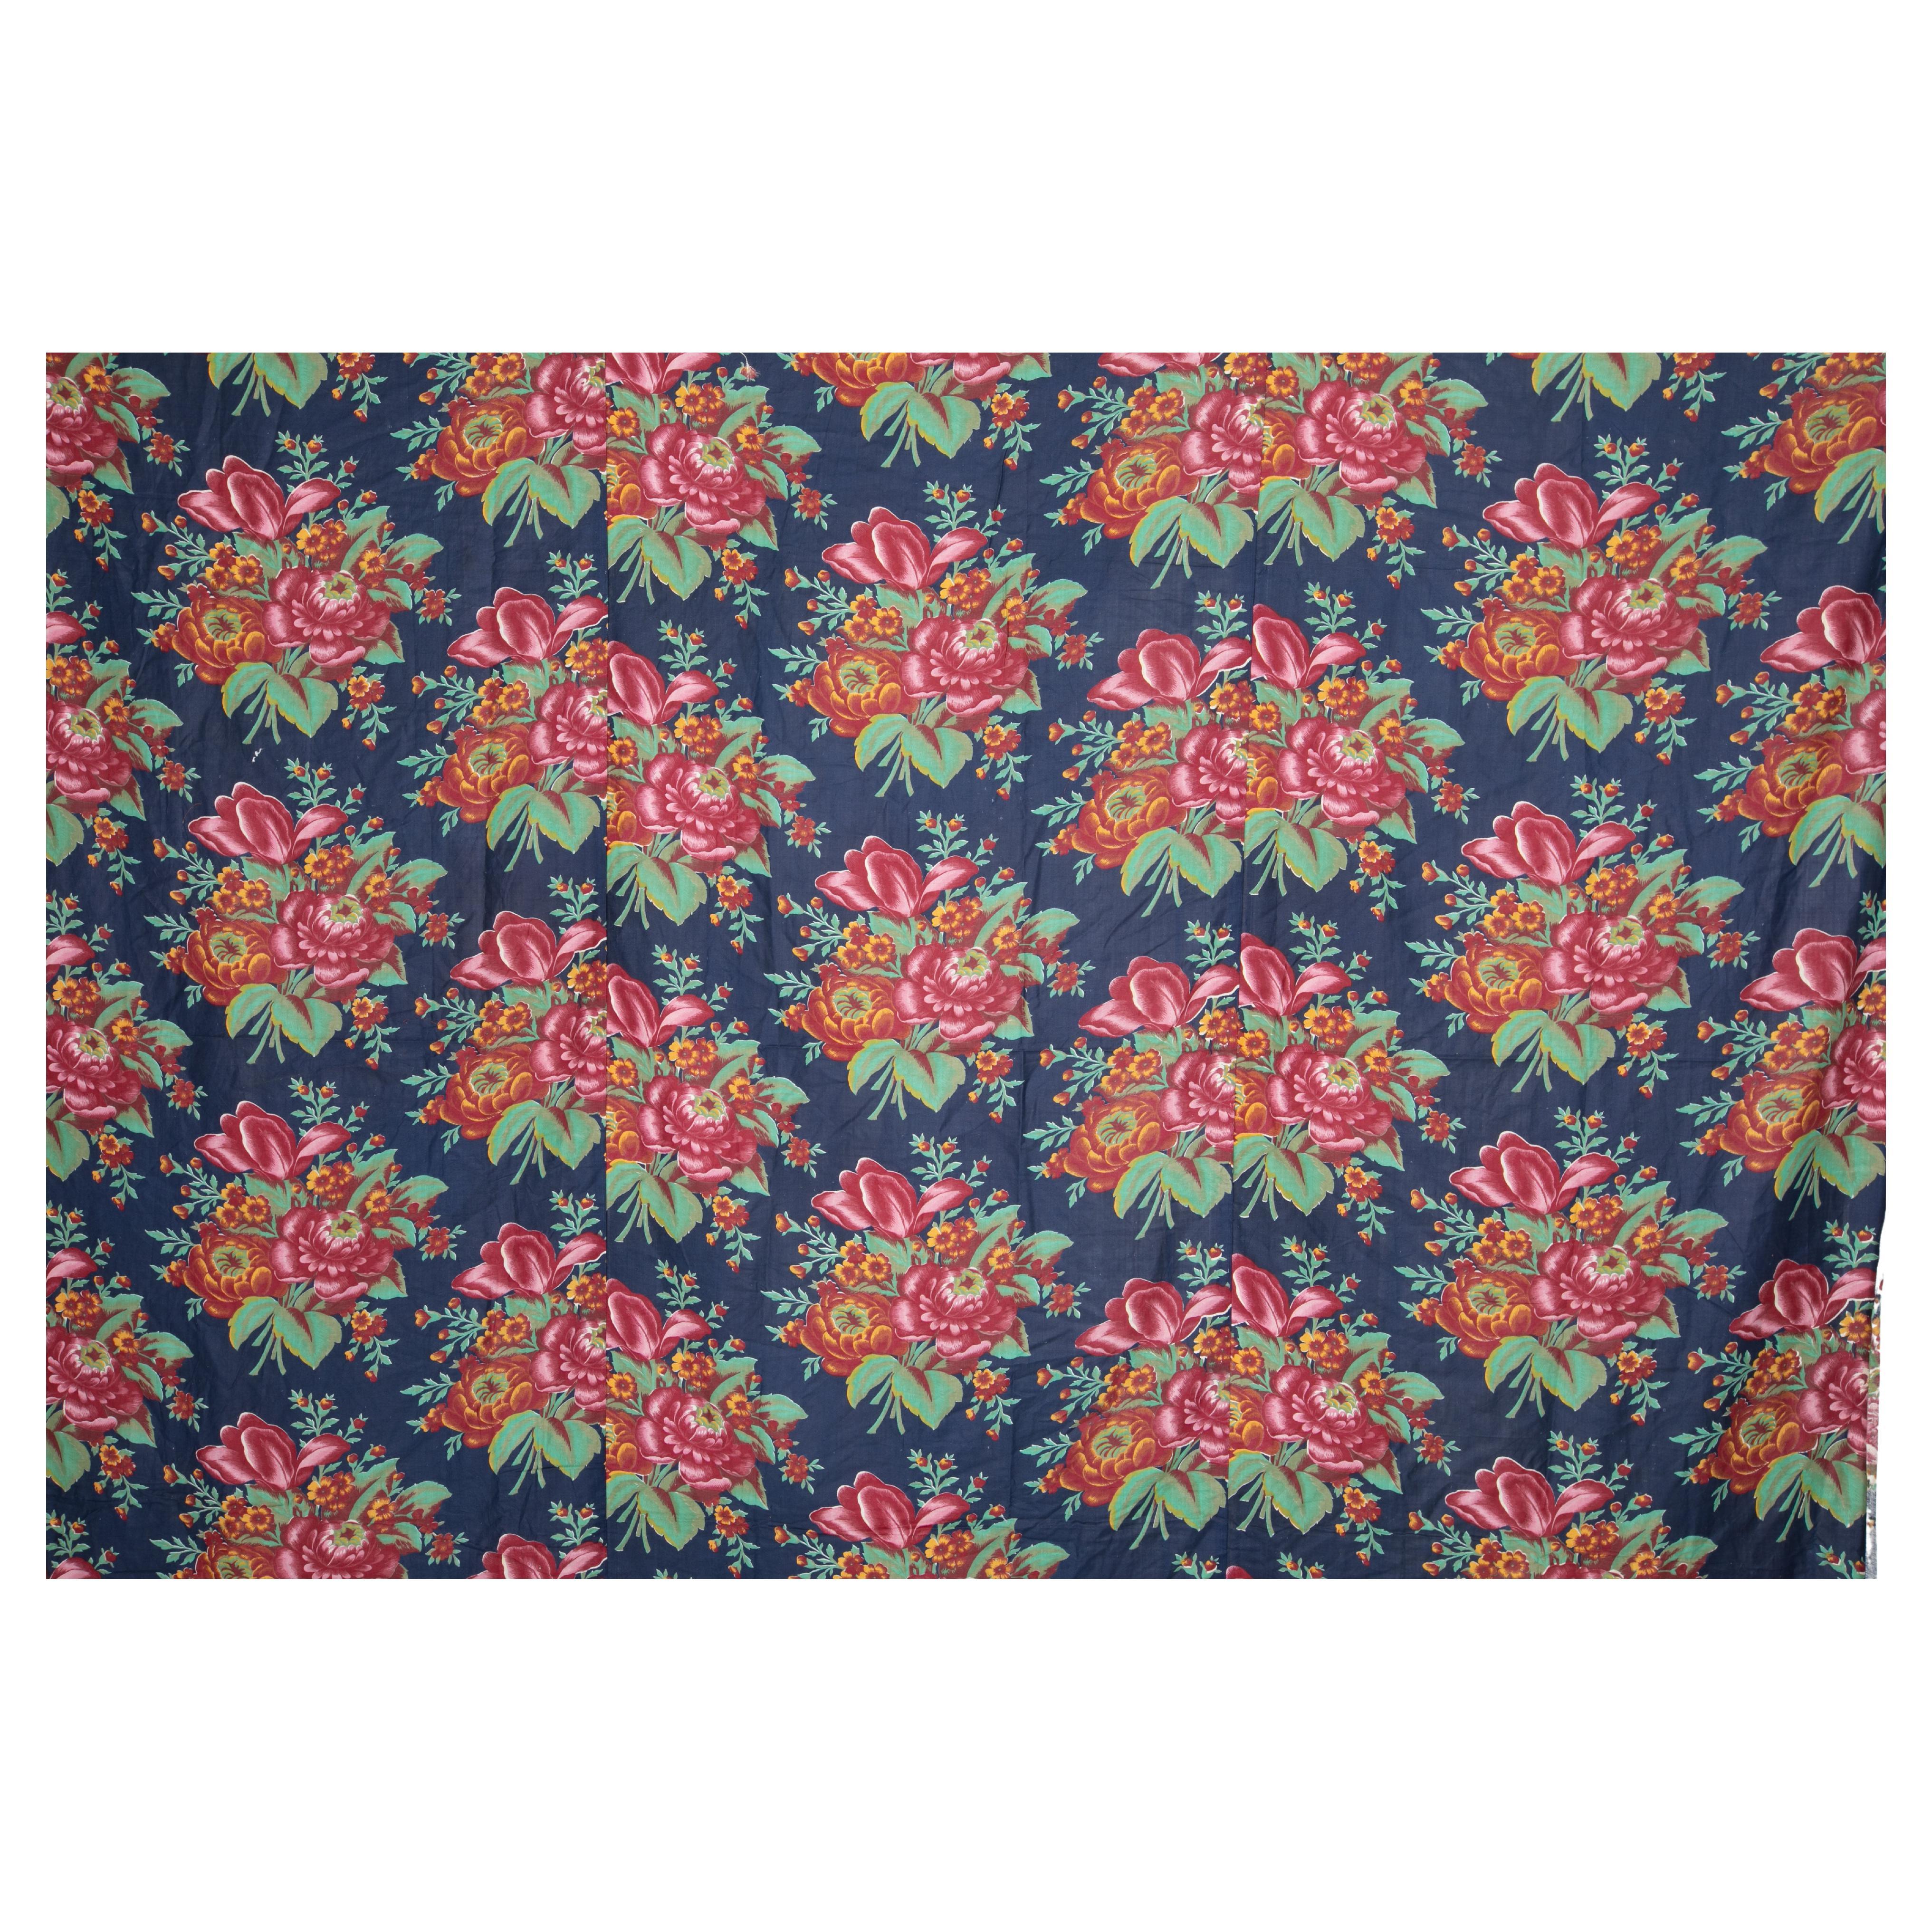 Russian Roller Printed Cotton Fabric Panel, Mid-20th Century or Earlier